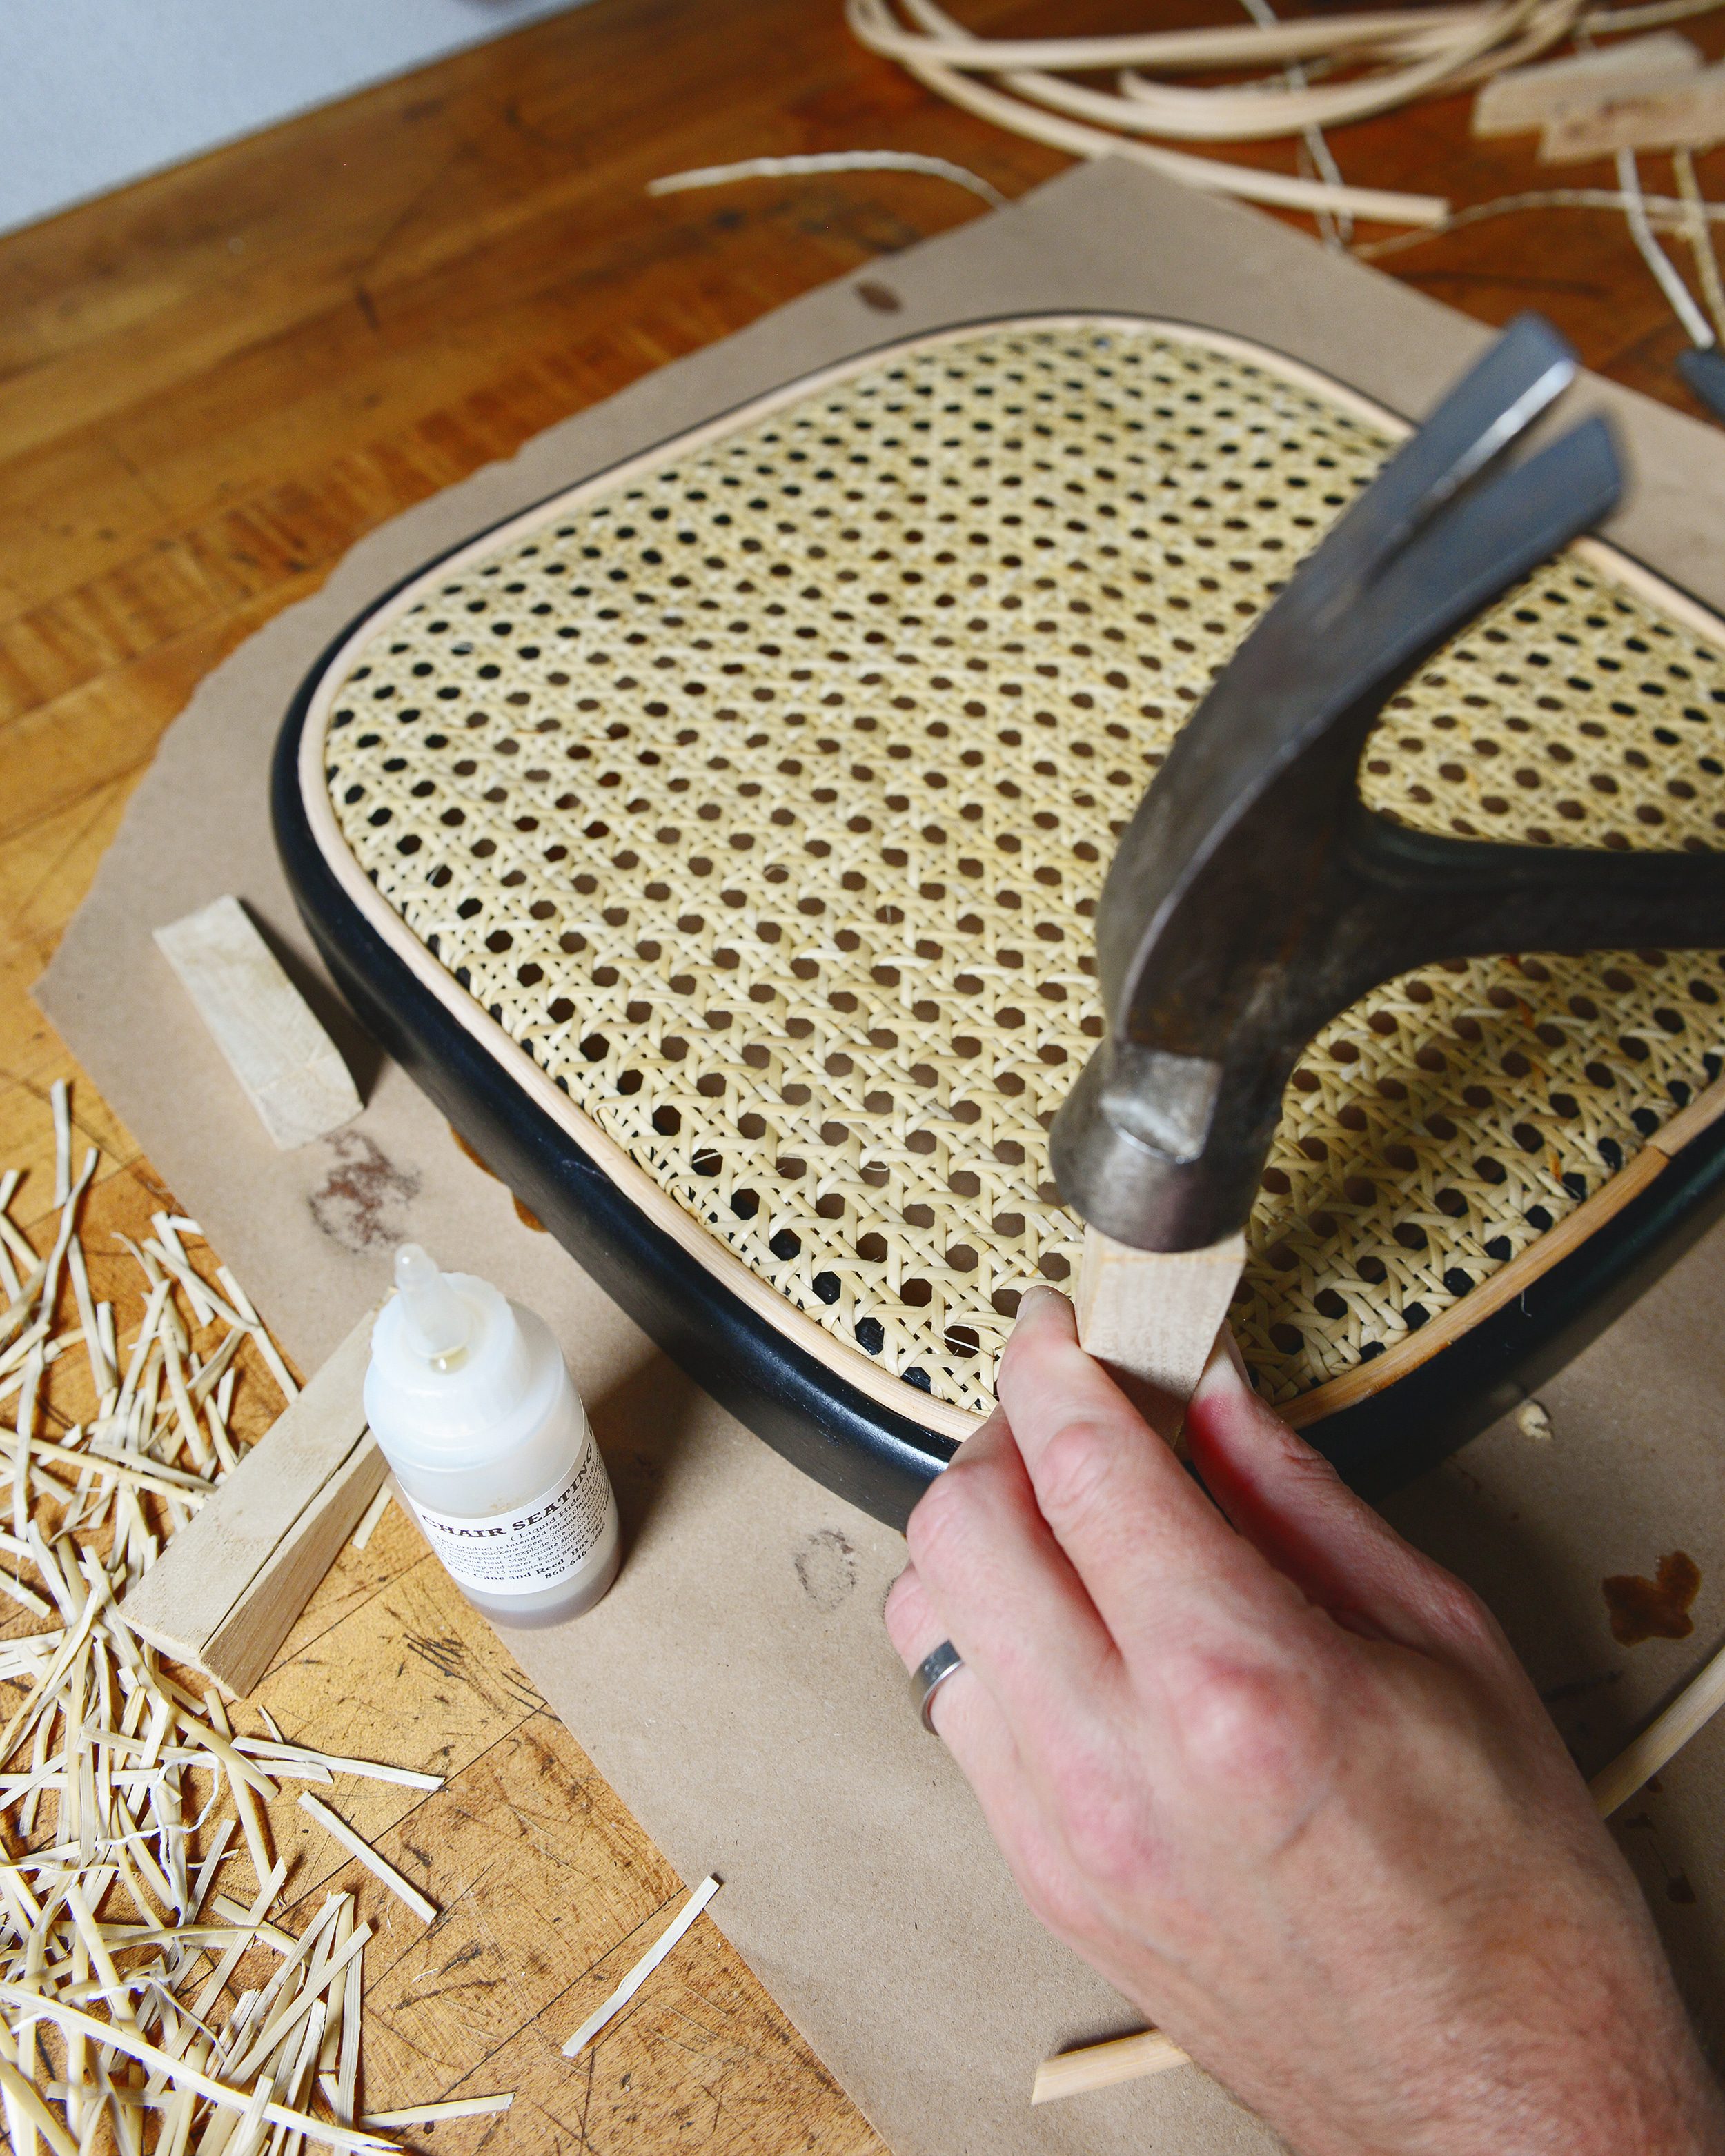 Recaning and painting a vintage rocking chair // via yellow brick home